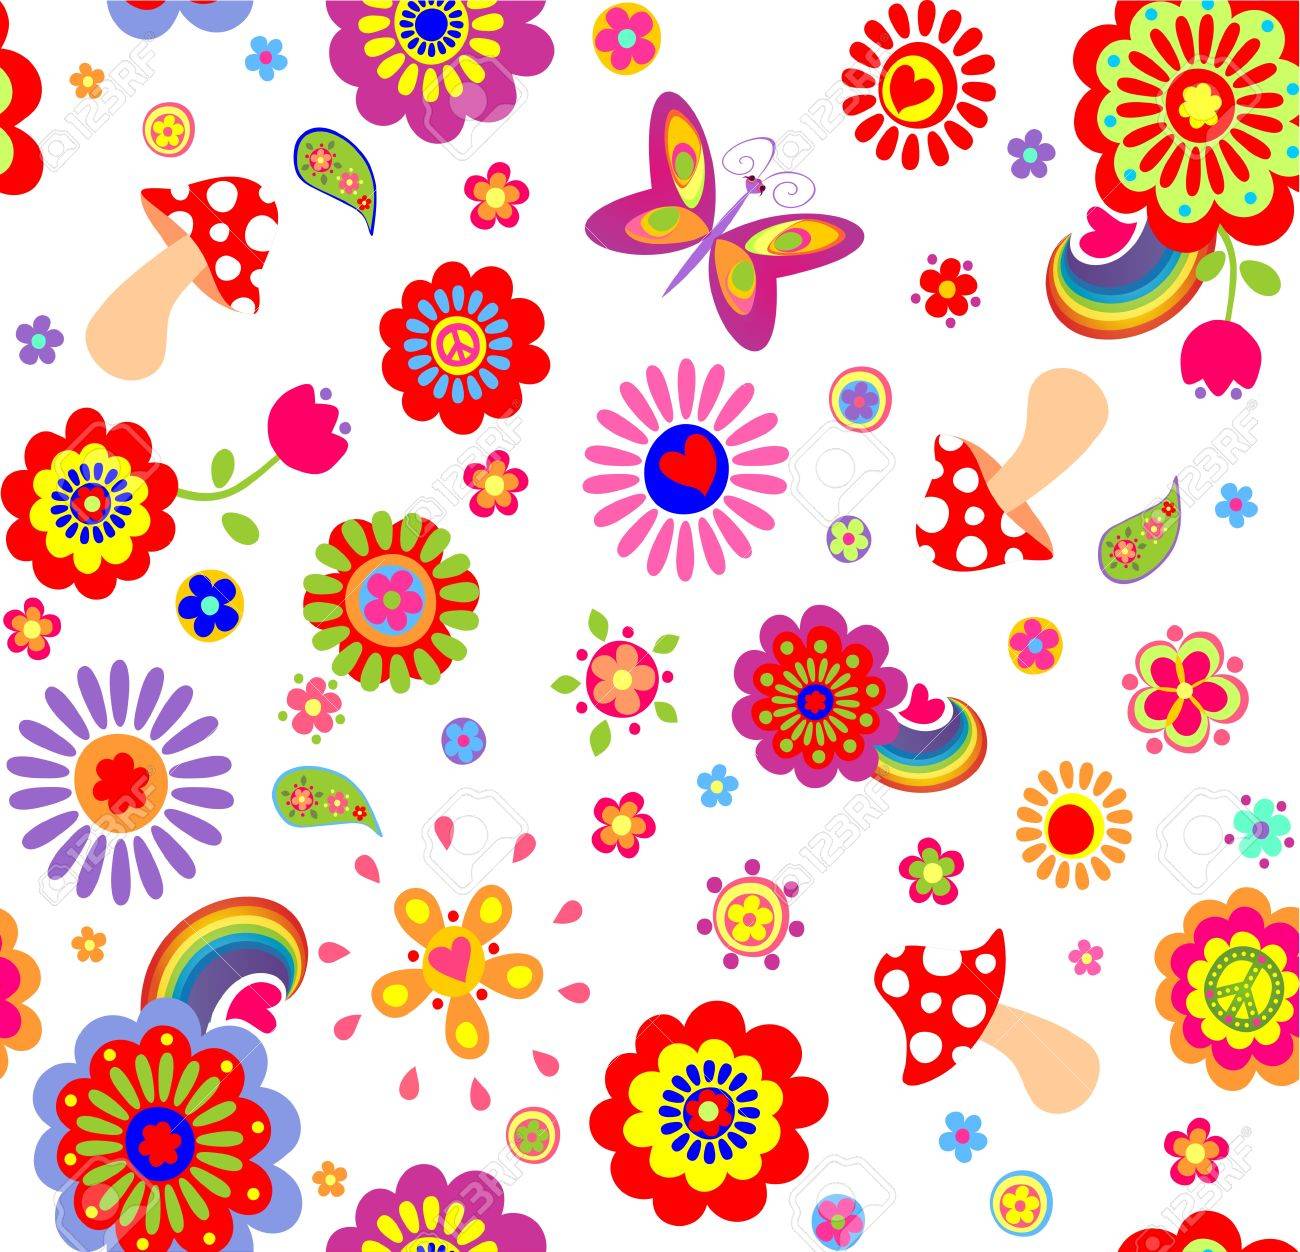 Childish Funny Wallpaper With Hippie Symbolic Royalty